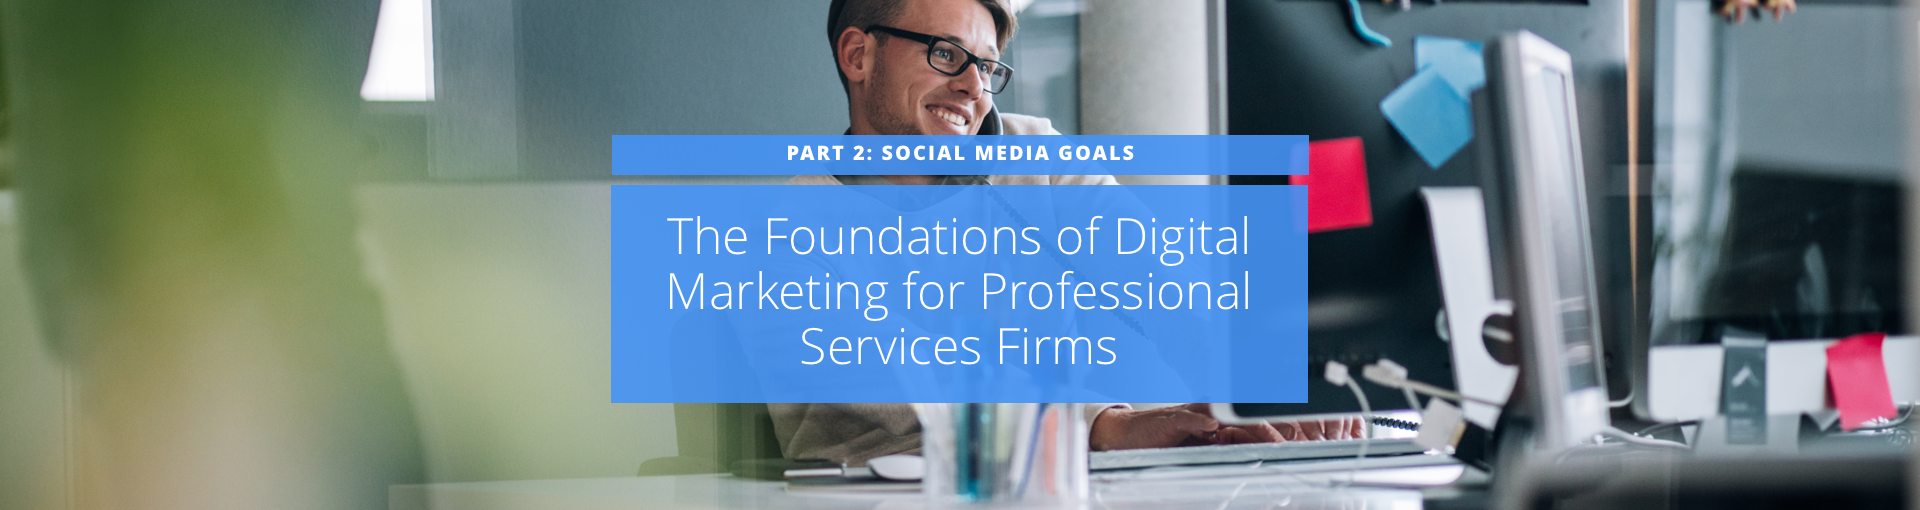 Digital Marketing for Professional Services Firms, Part 2: Social Media Goals Featured Image